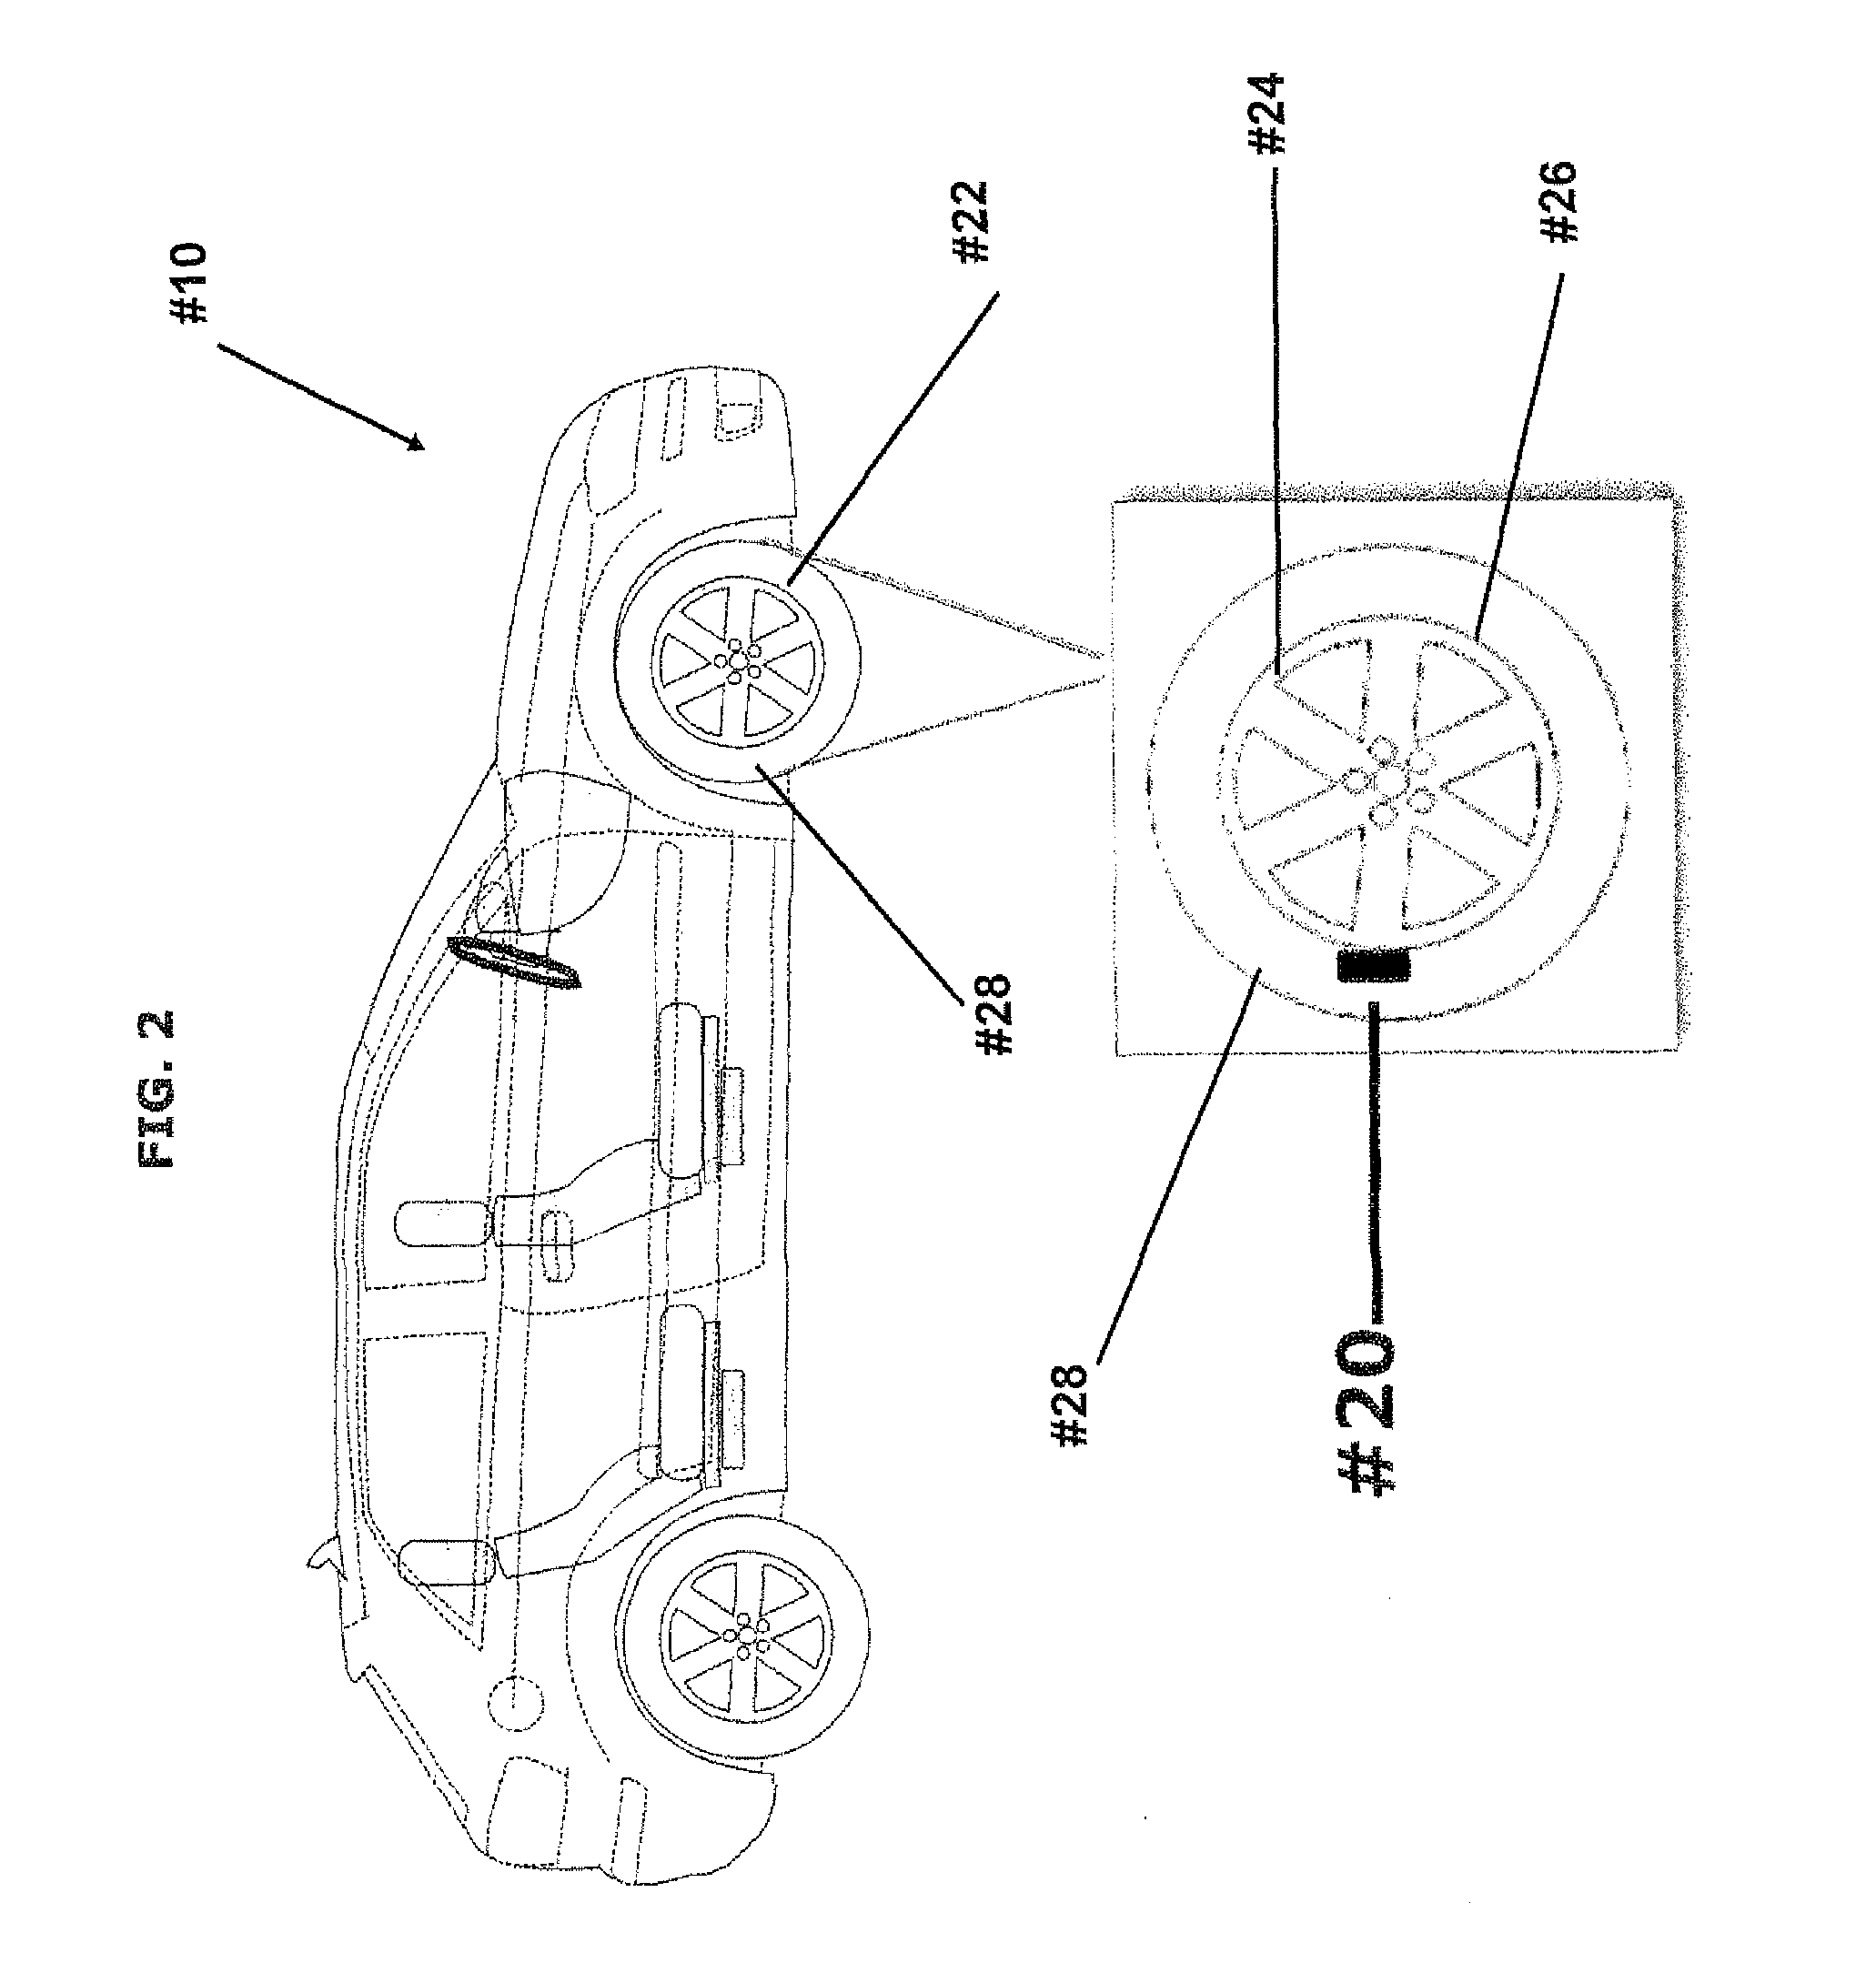 System for obtaining vehicular traffic flow data from a tire pressure monitoring system